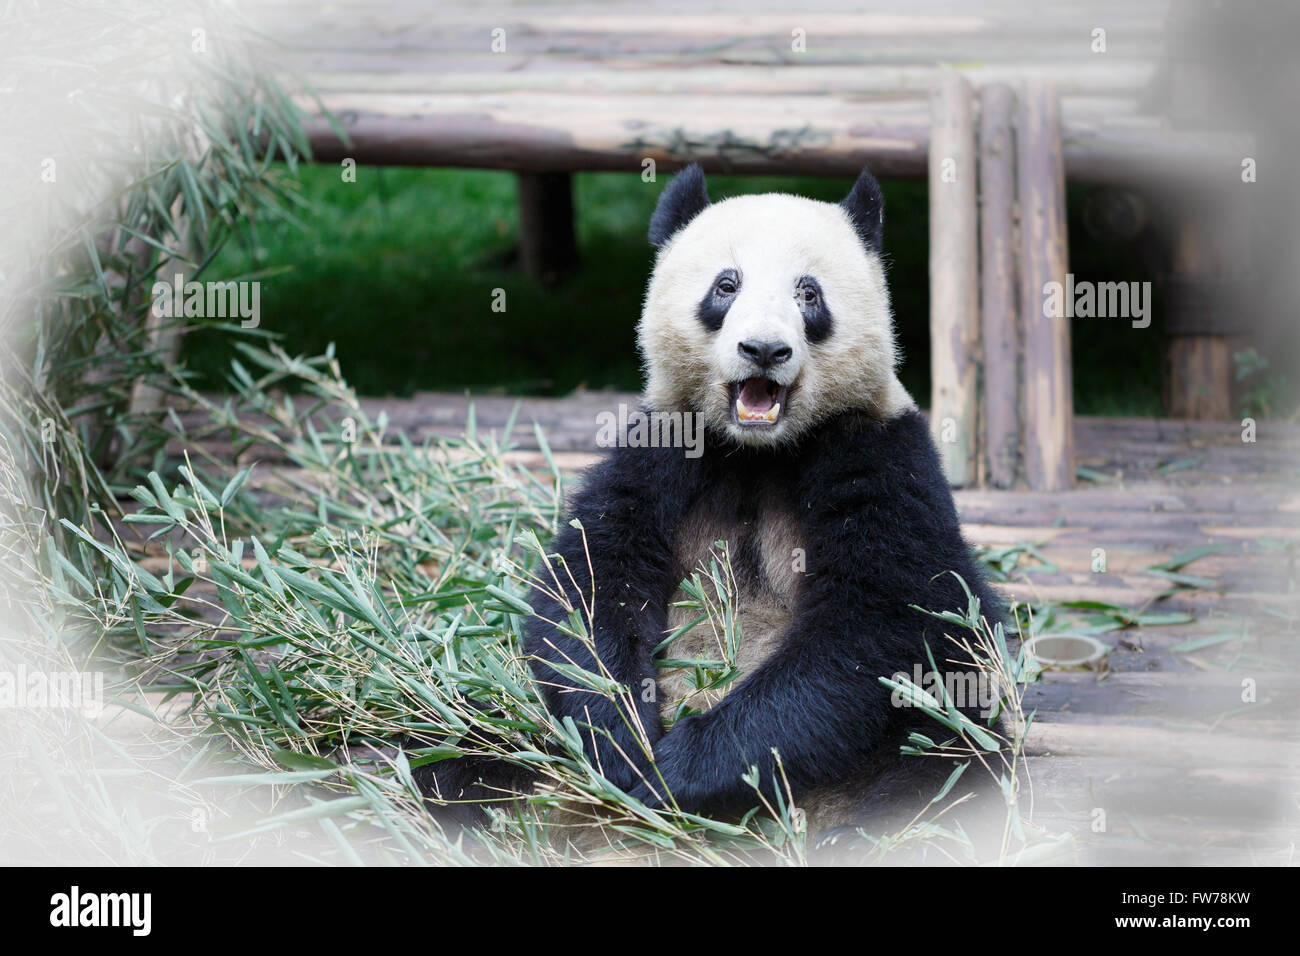 A panda sitting on the ground laughing Stock Photo